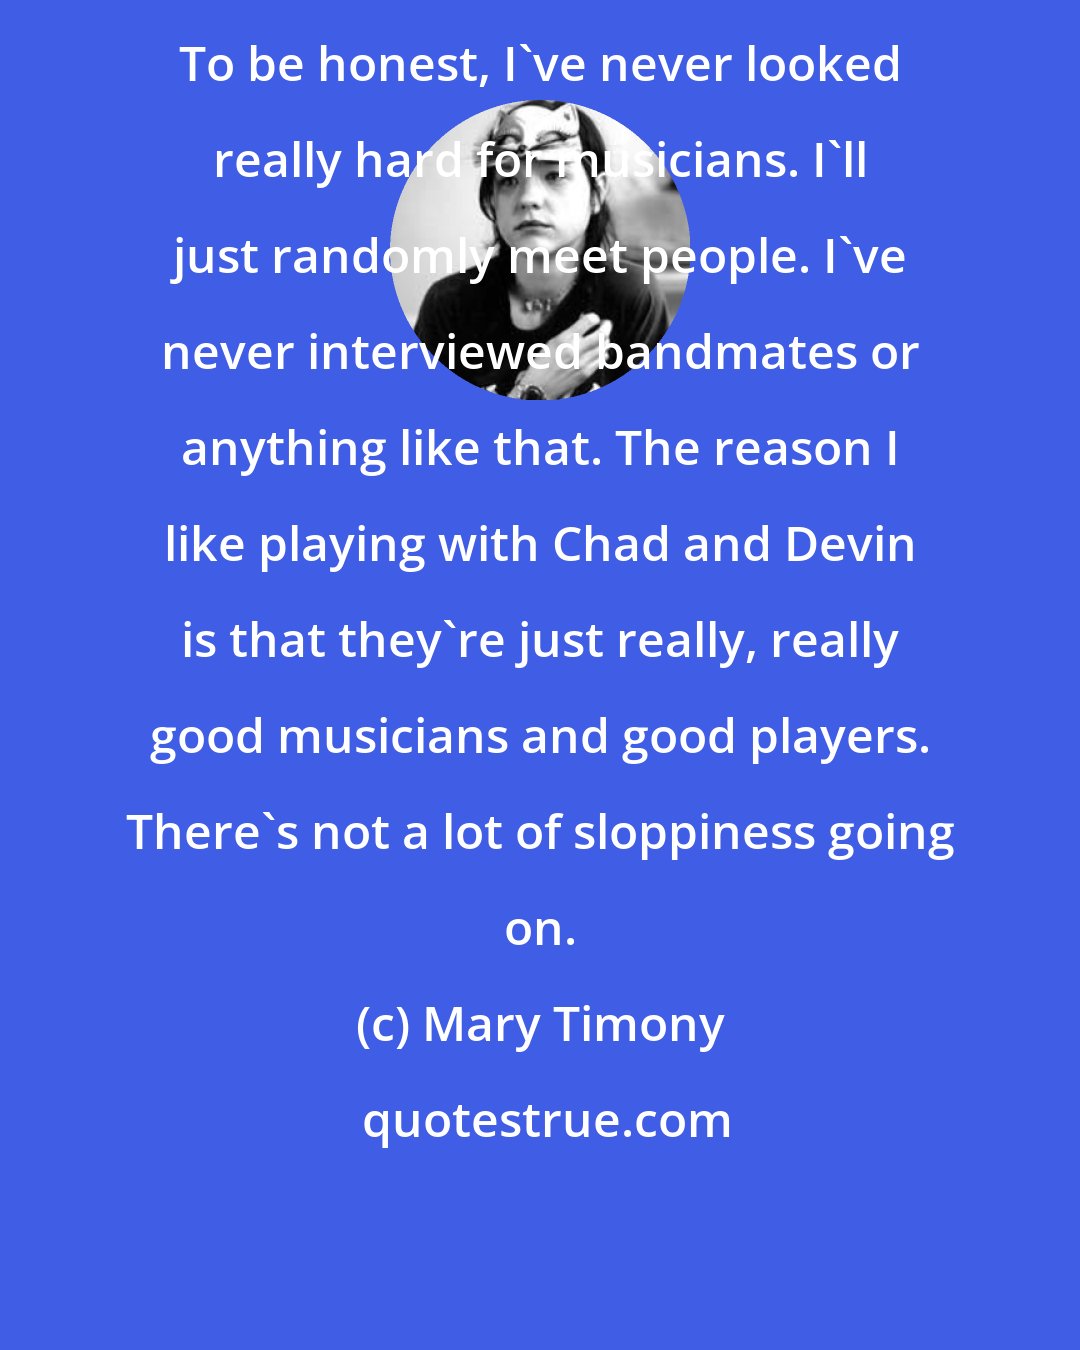 Mary Timony: To be honest, I've never looked really hard for musicians. I'll just randomly meet people. I've never interviewed bandmates or anything like that. The reason I like playing with Chad and Devin is that they're just really, really good musicians and good players. There's not a lot of sloppiness going on.